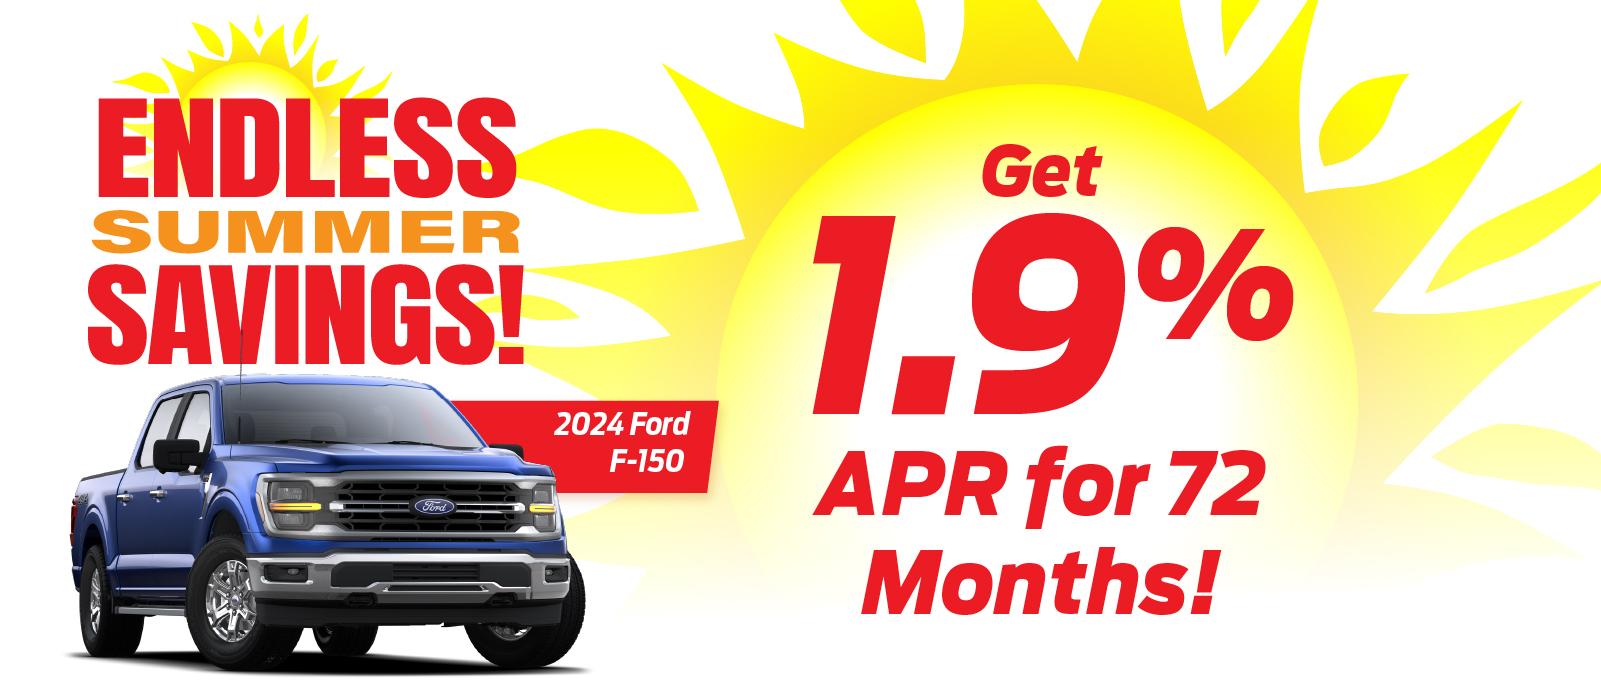 Shop 1.9% for 72 Months on 2024 Ford F-150!🔥